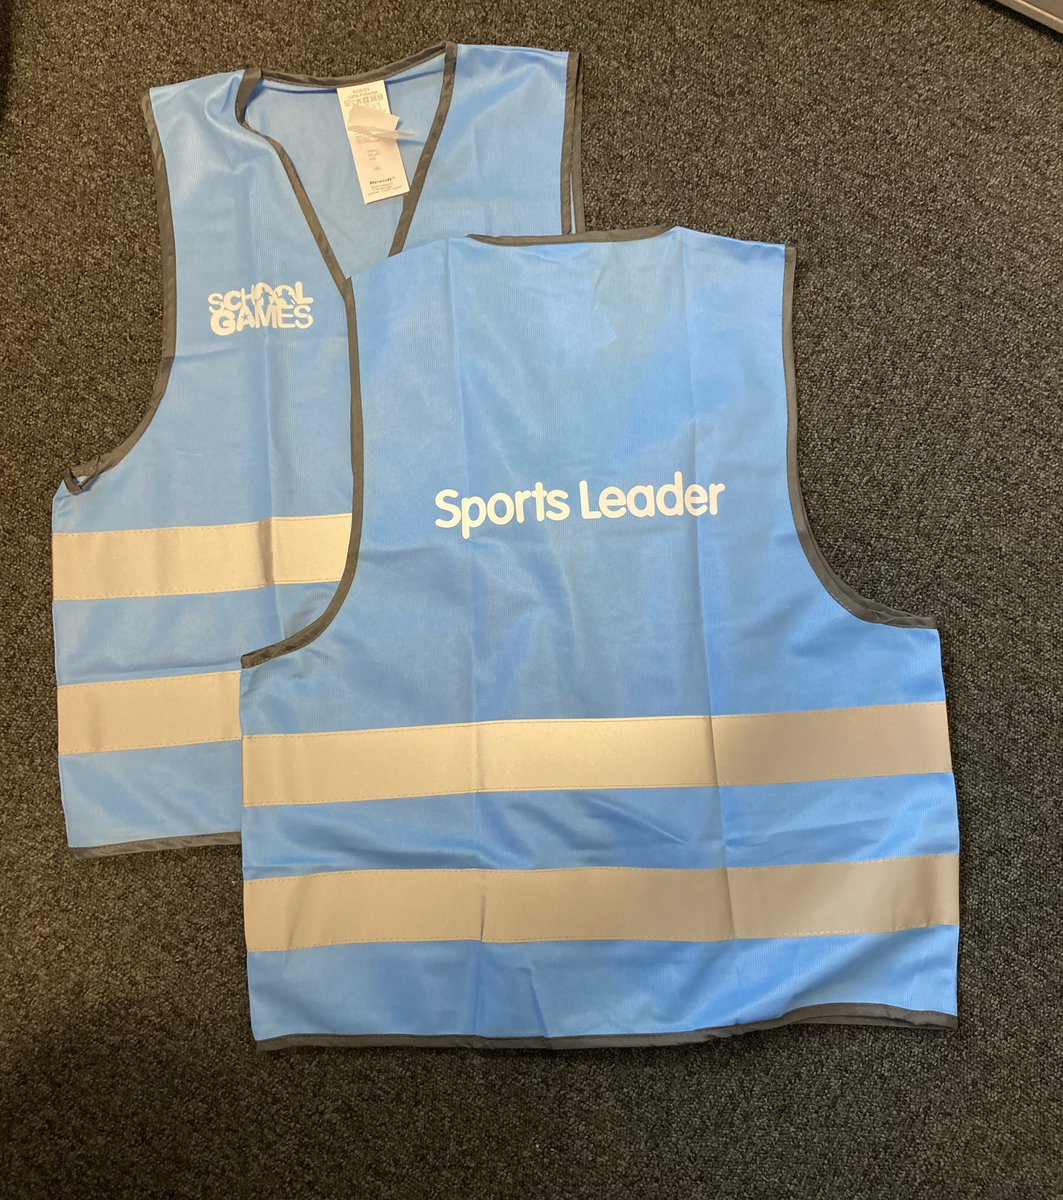 🥳 new sports leaders bibs have arrived for the Mansfield Primary School Leaders 🤩 looking forward to handing them out to the leaders 🙌🏻